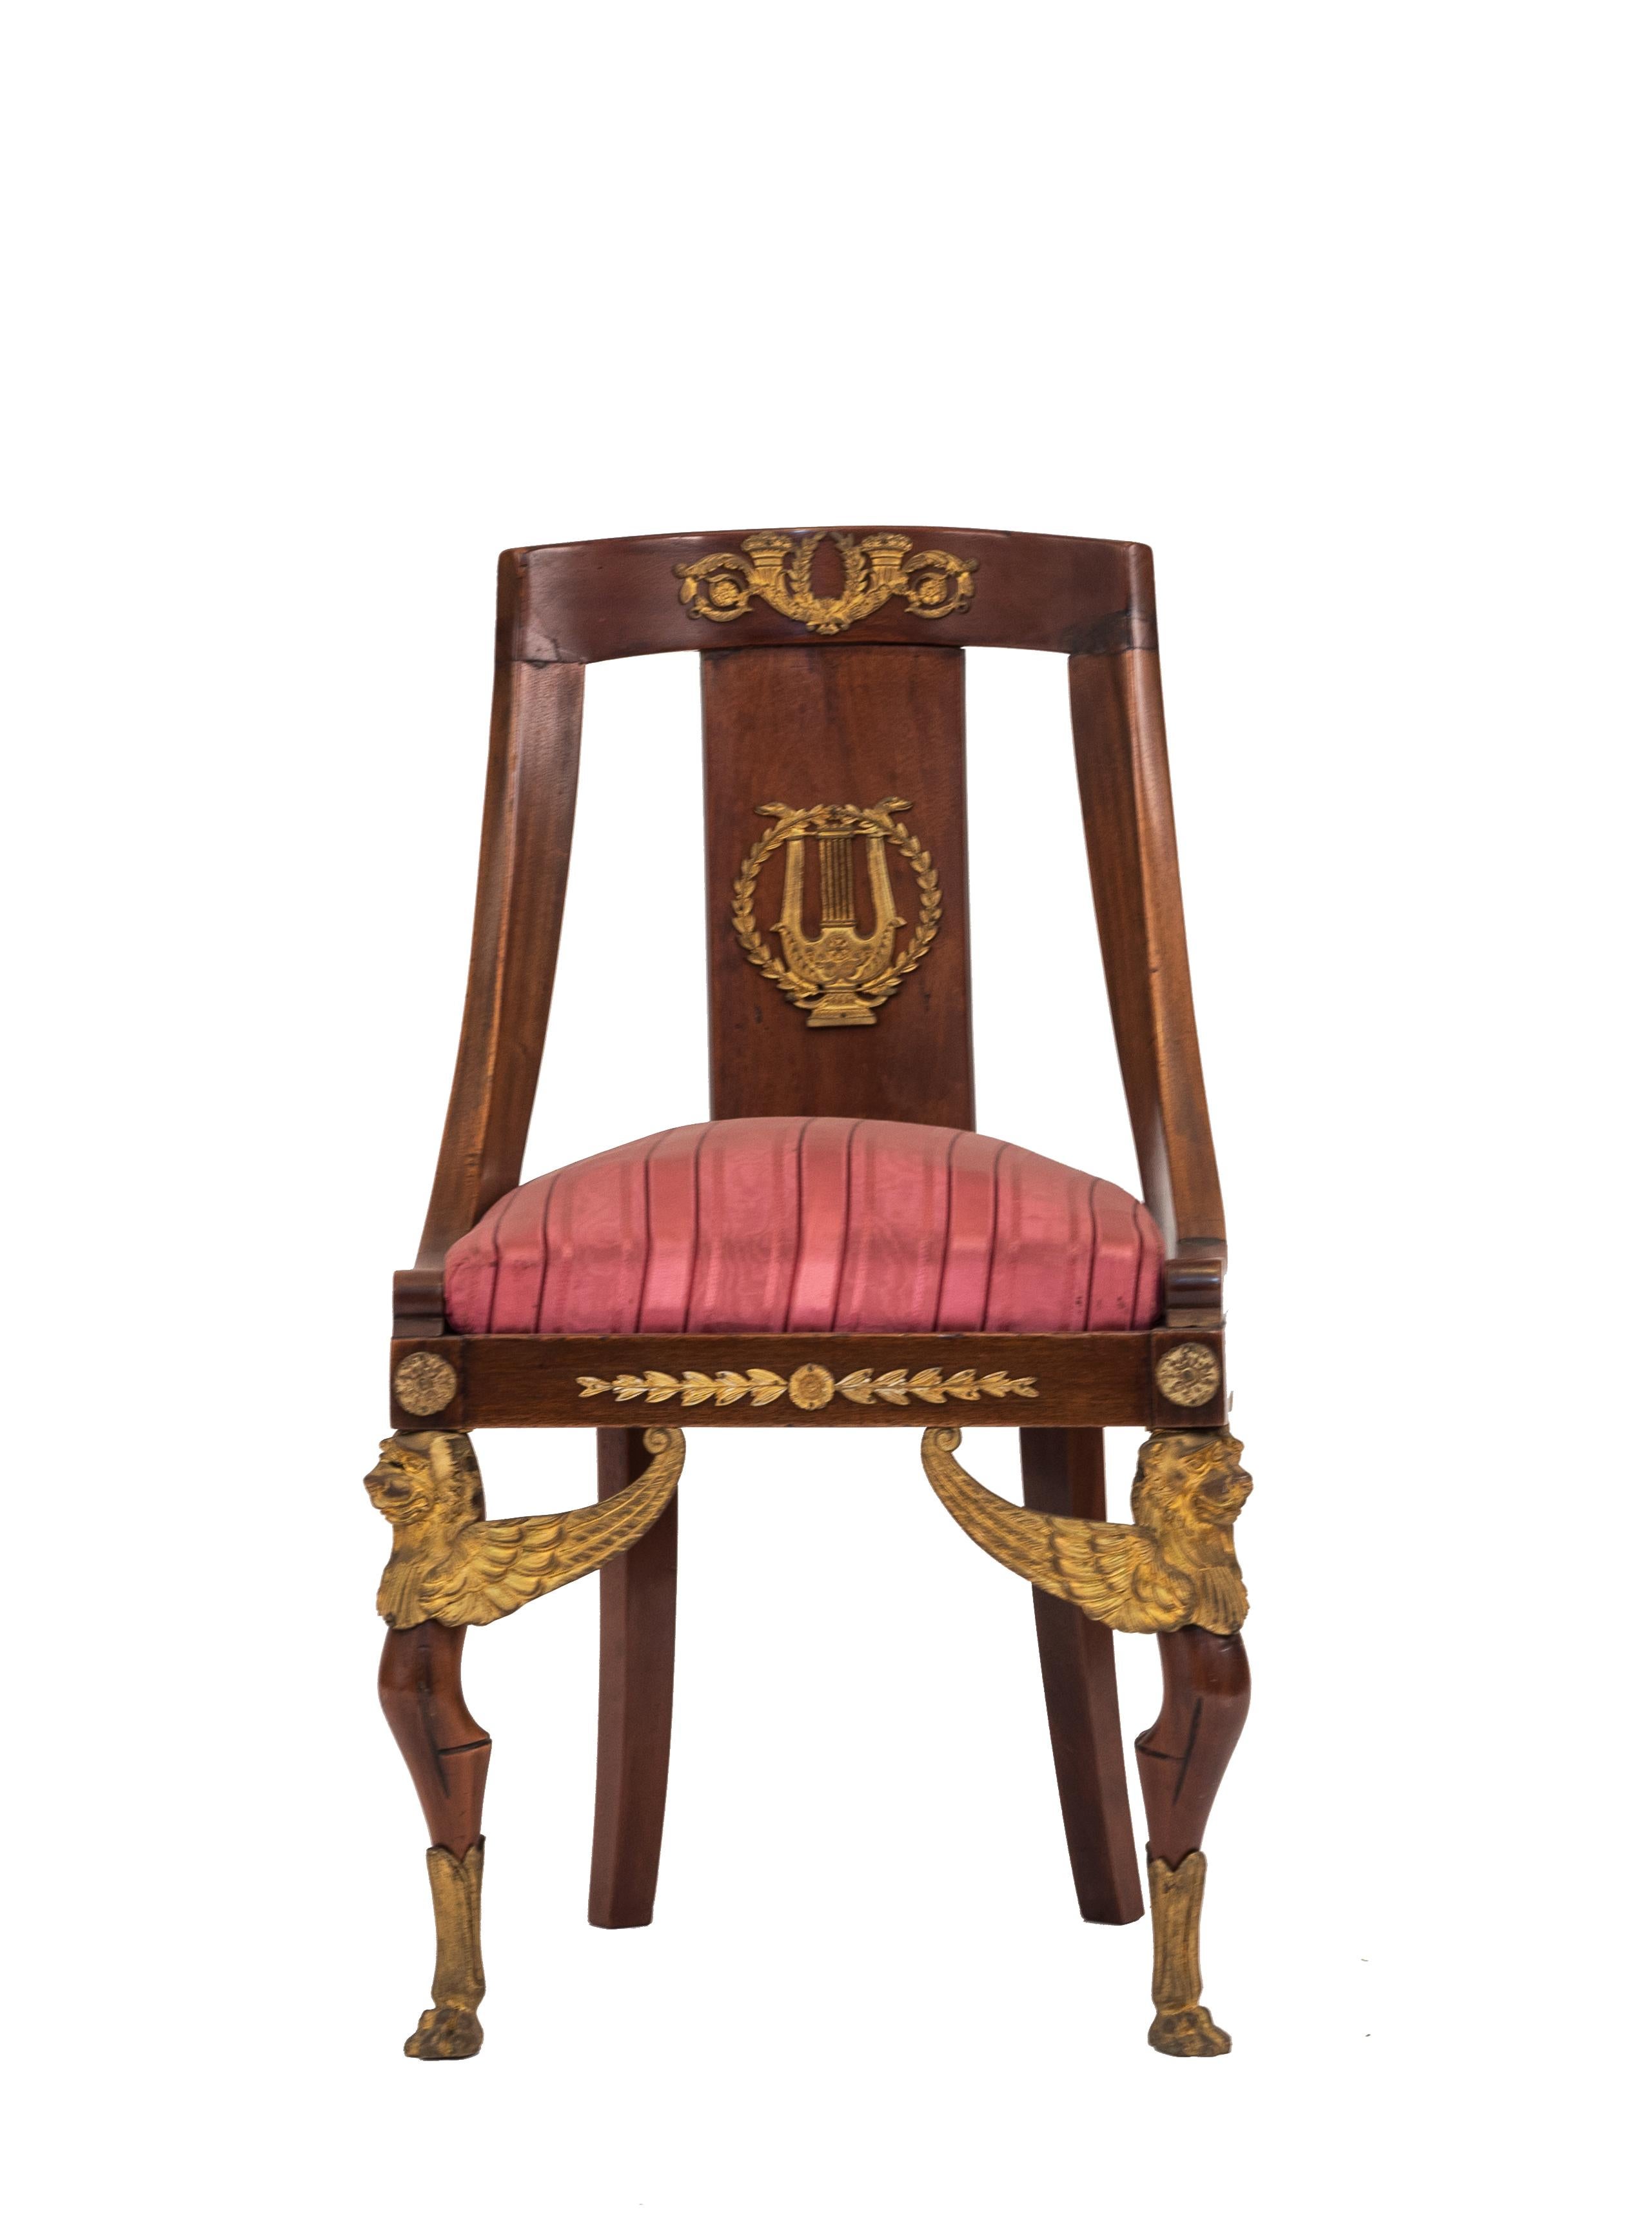 French Empire style (19th Cent) mahogany sleigh back side chair with bronze griffin legs and trim and red seat
